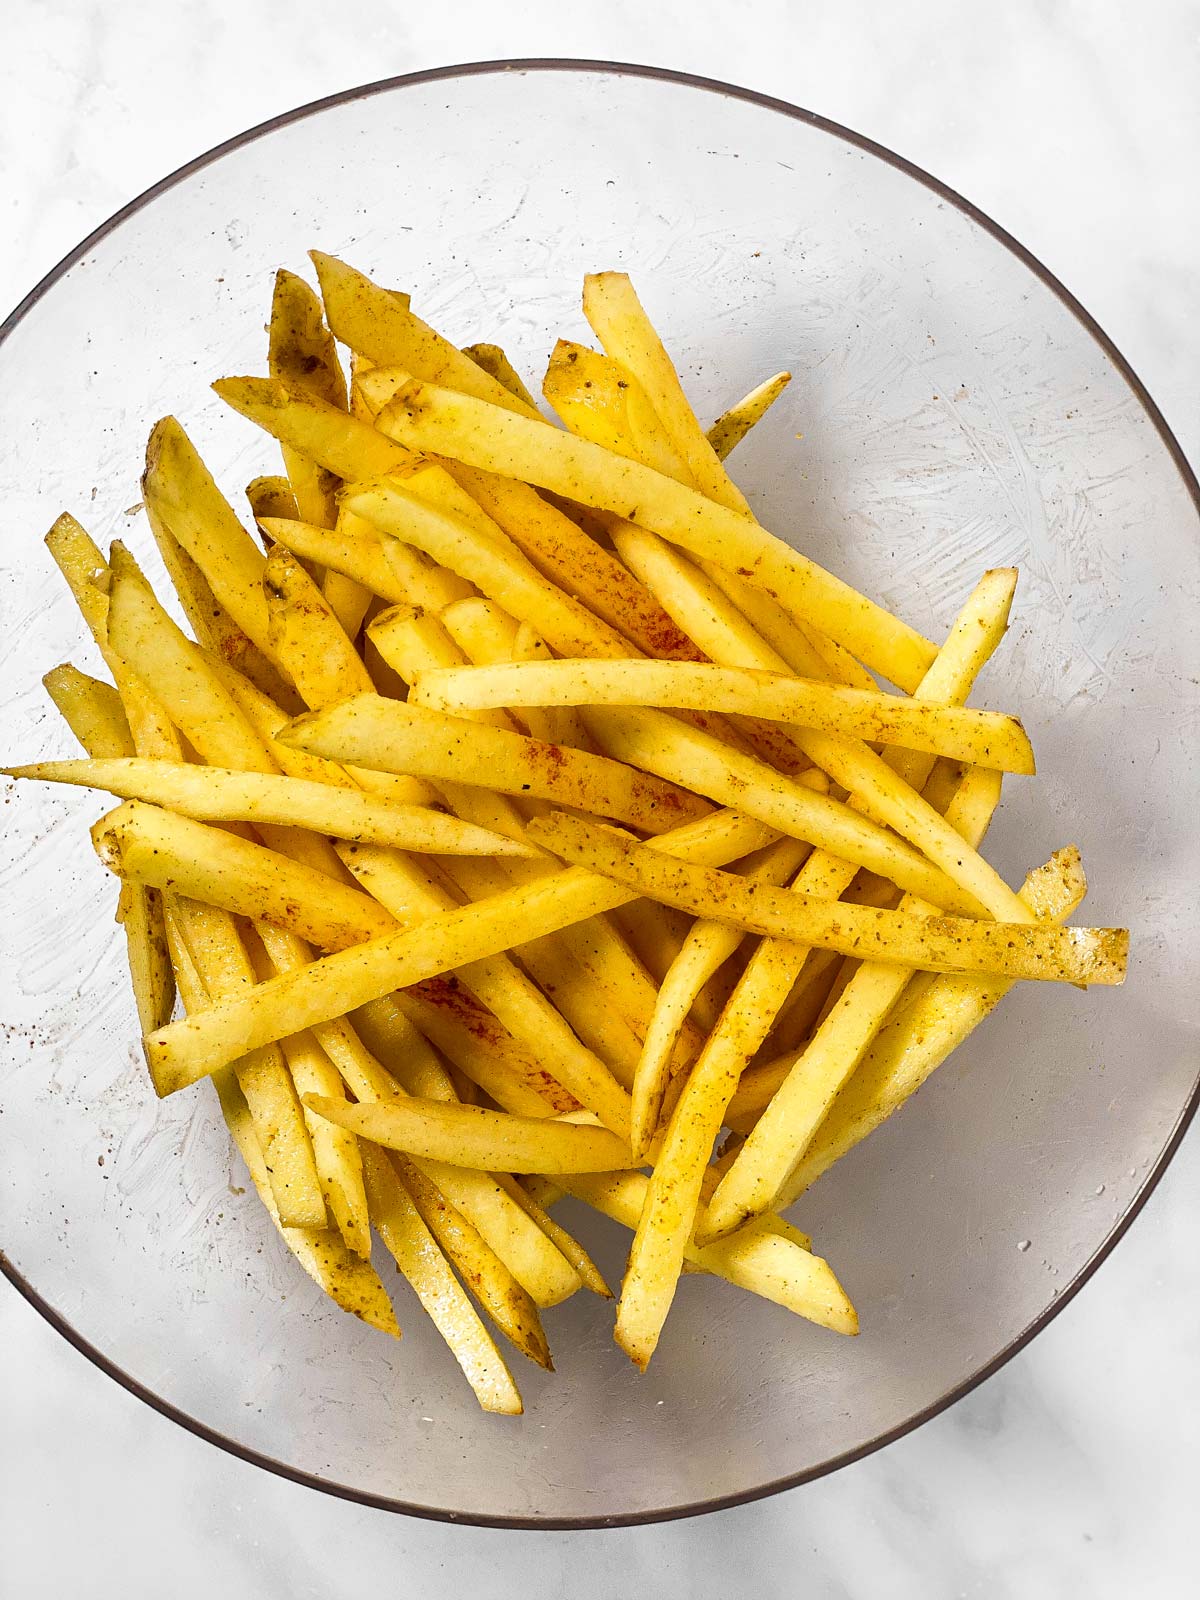 uncooked french fries in glass bowl covered in oil and seasoning